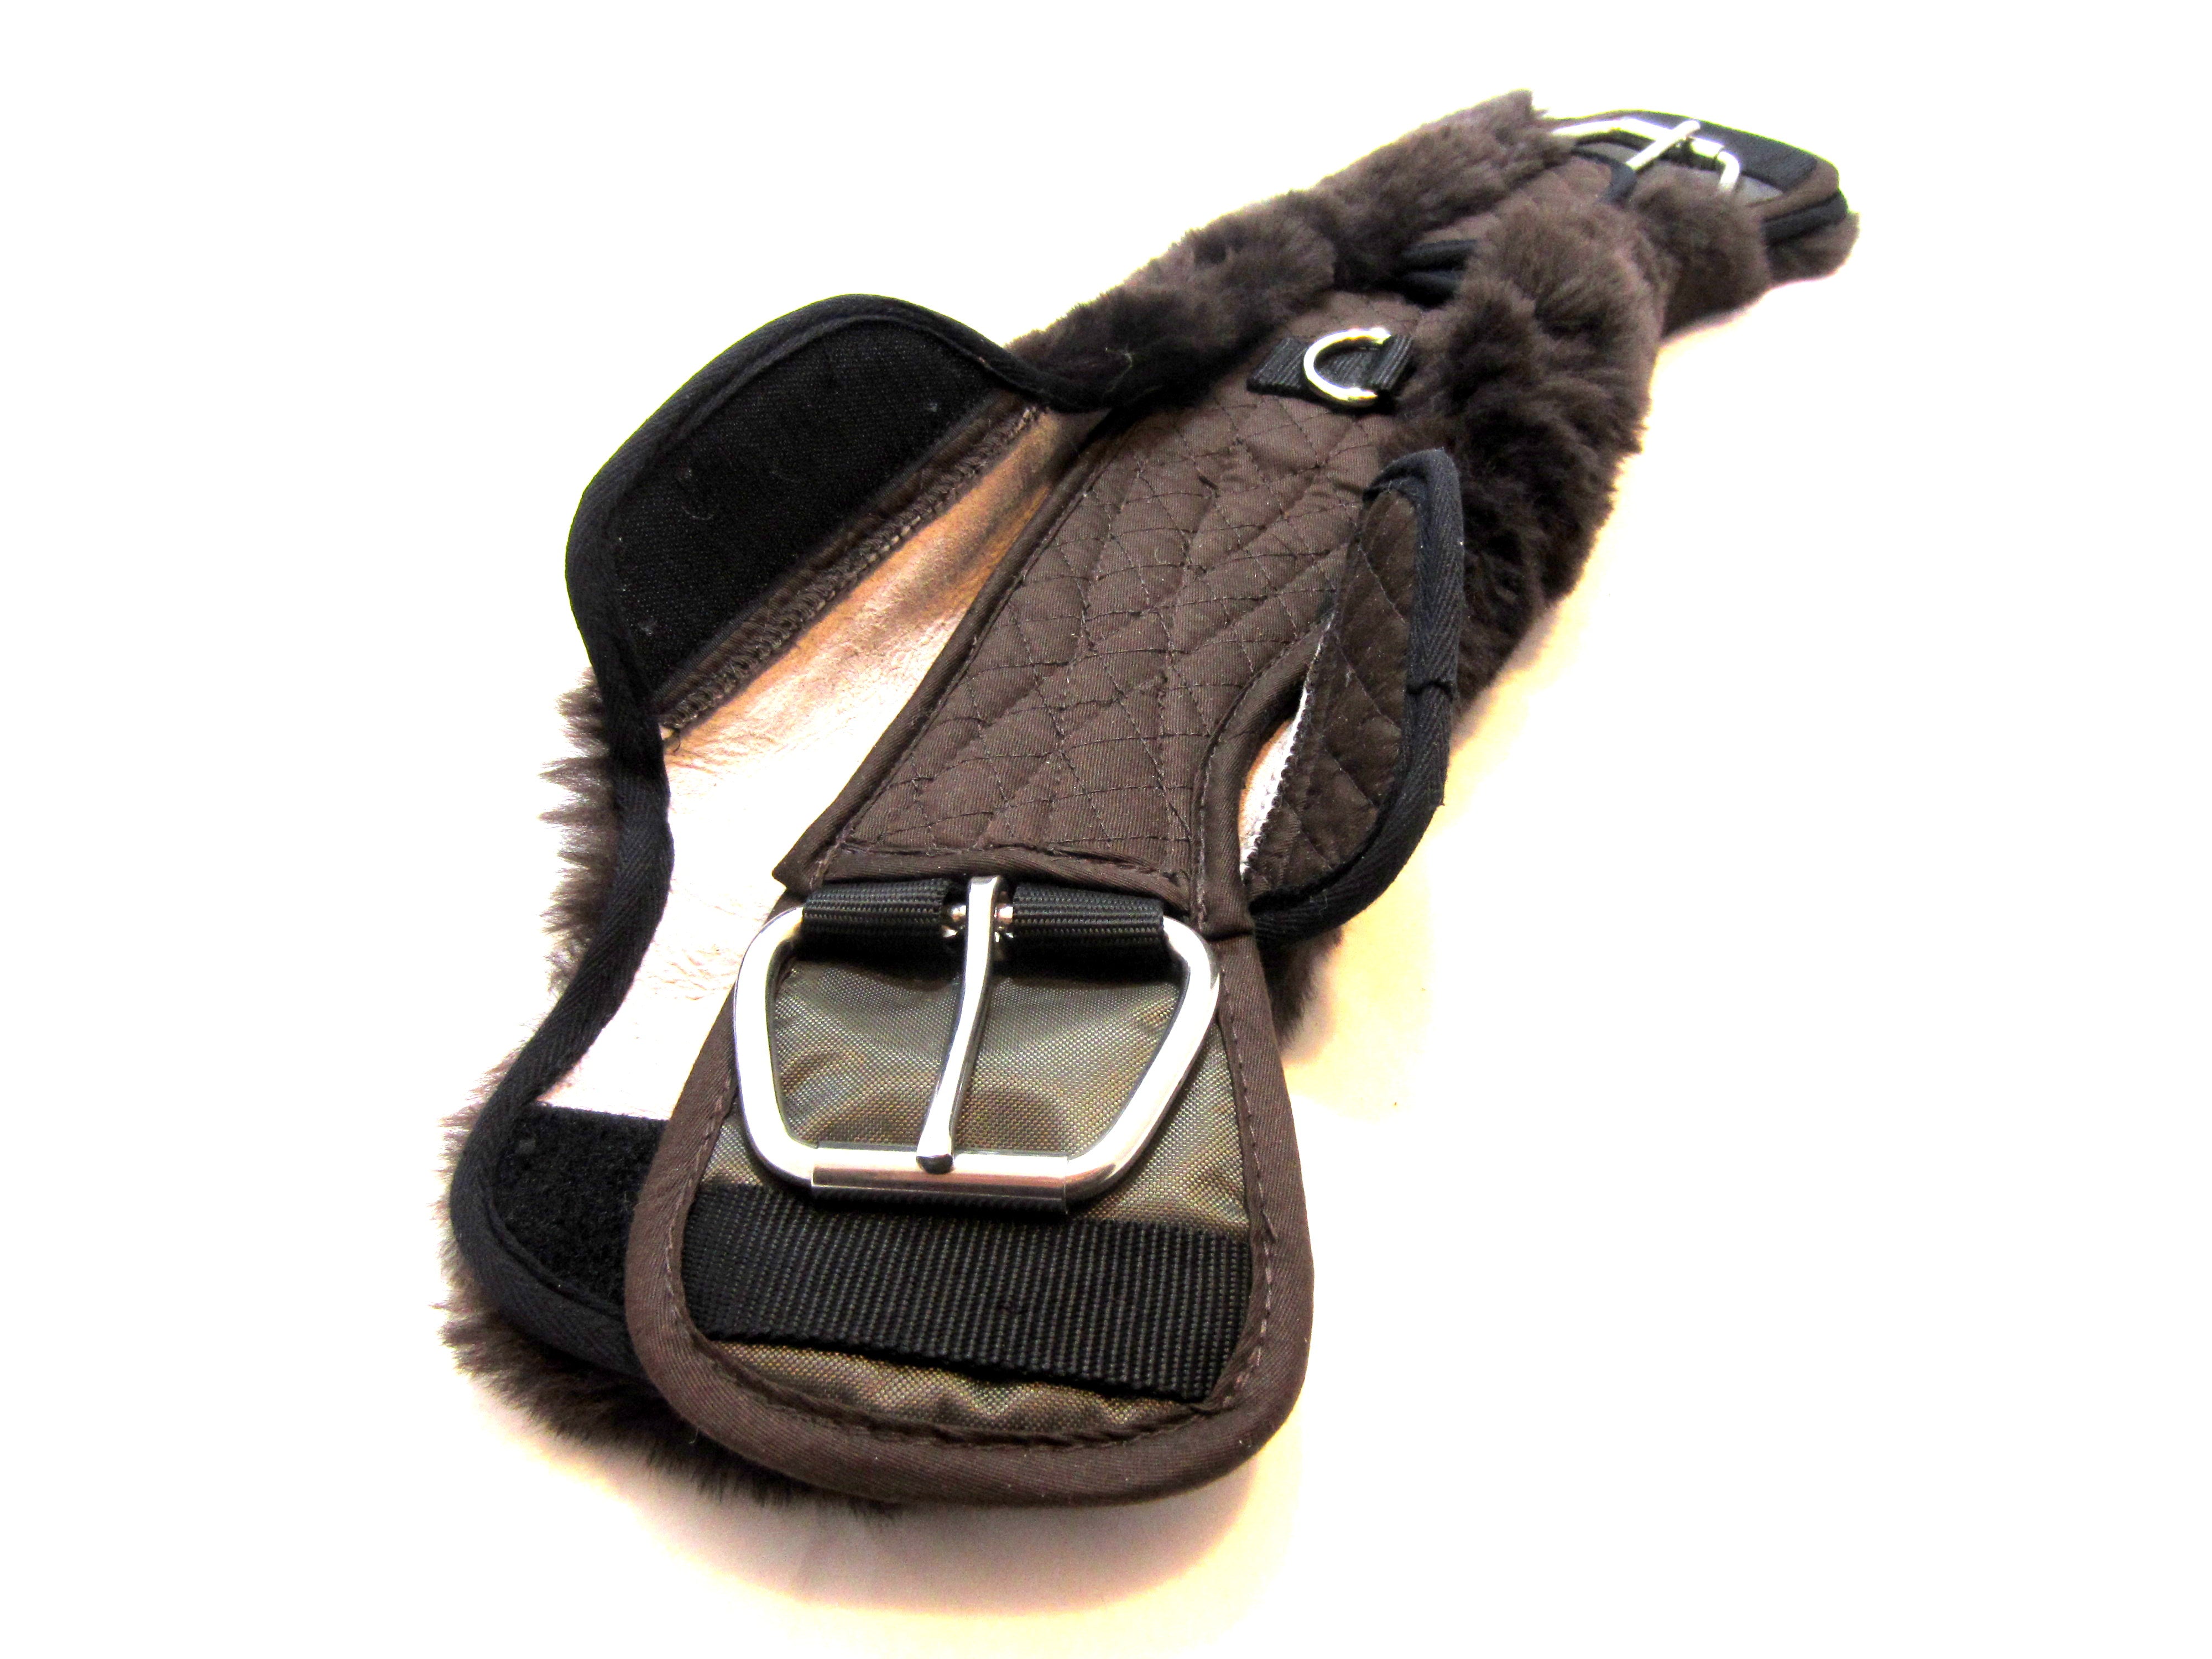 Soft western "moon girth" with lambskin - removable, brown saddle girth